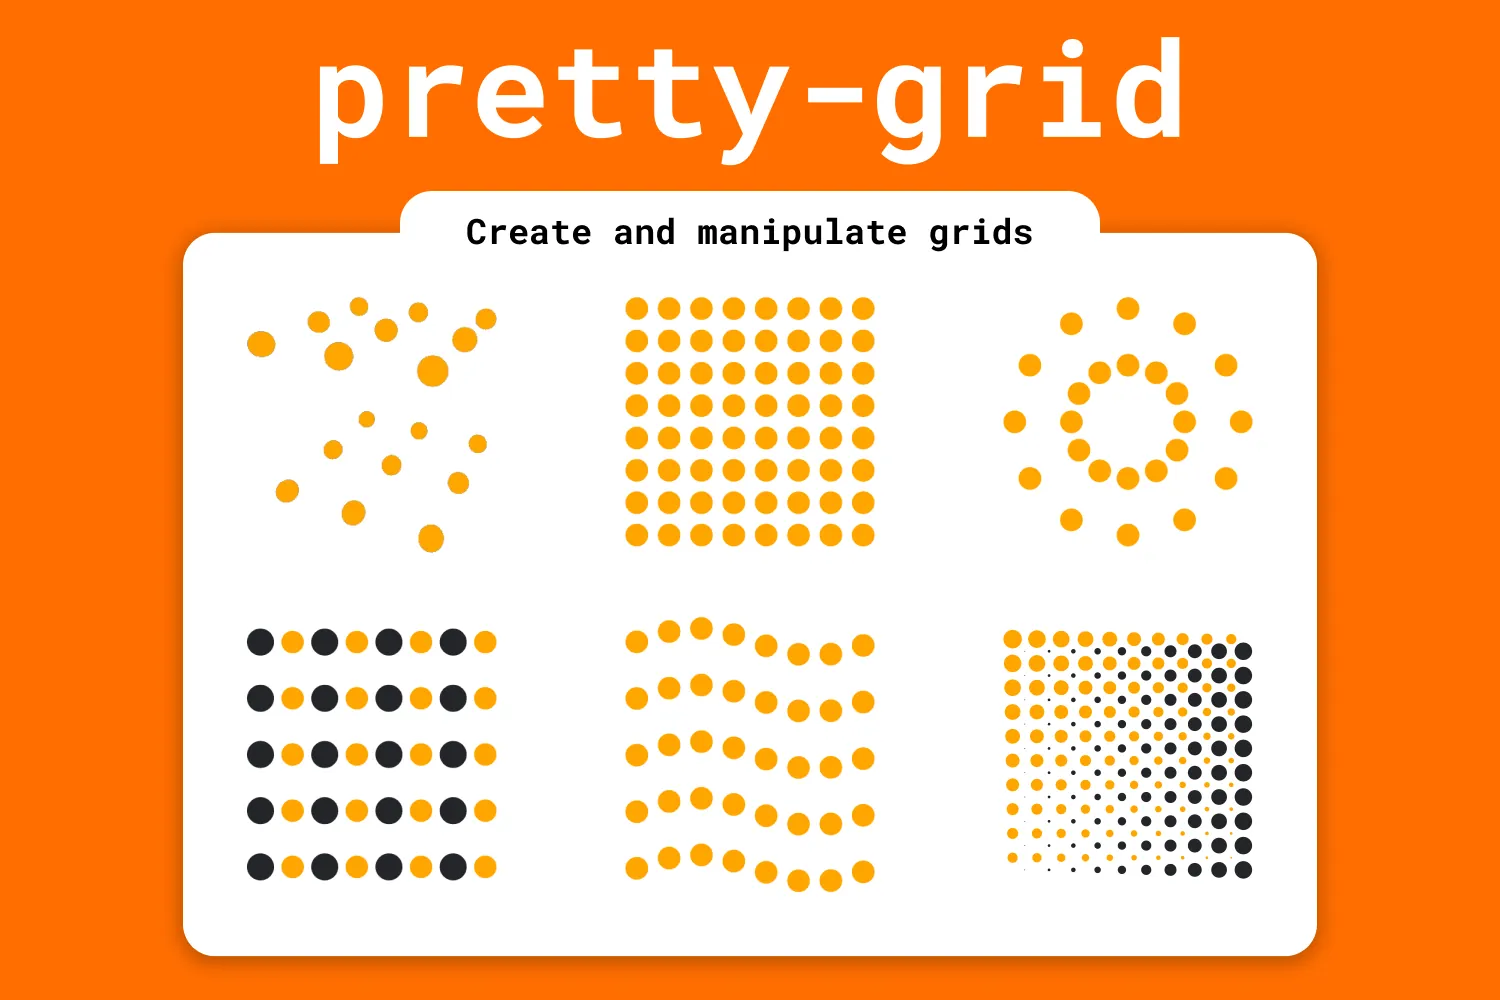 Six examples showing different grid structures created with the pretty-grid library